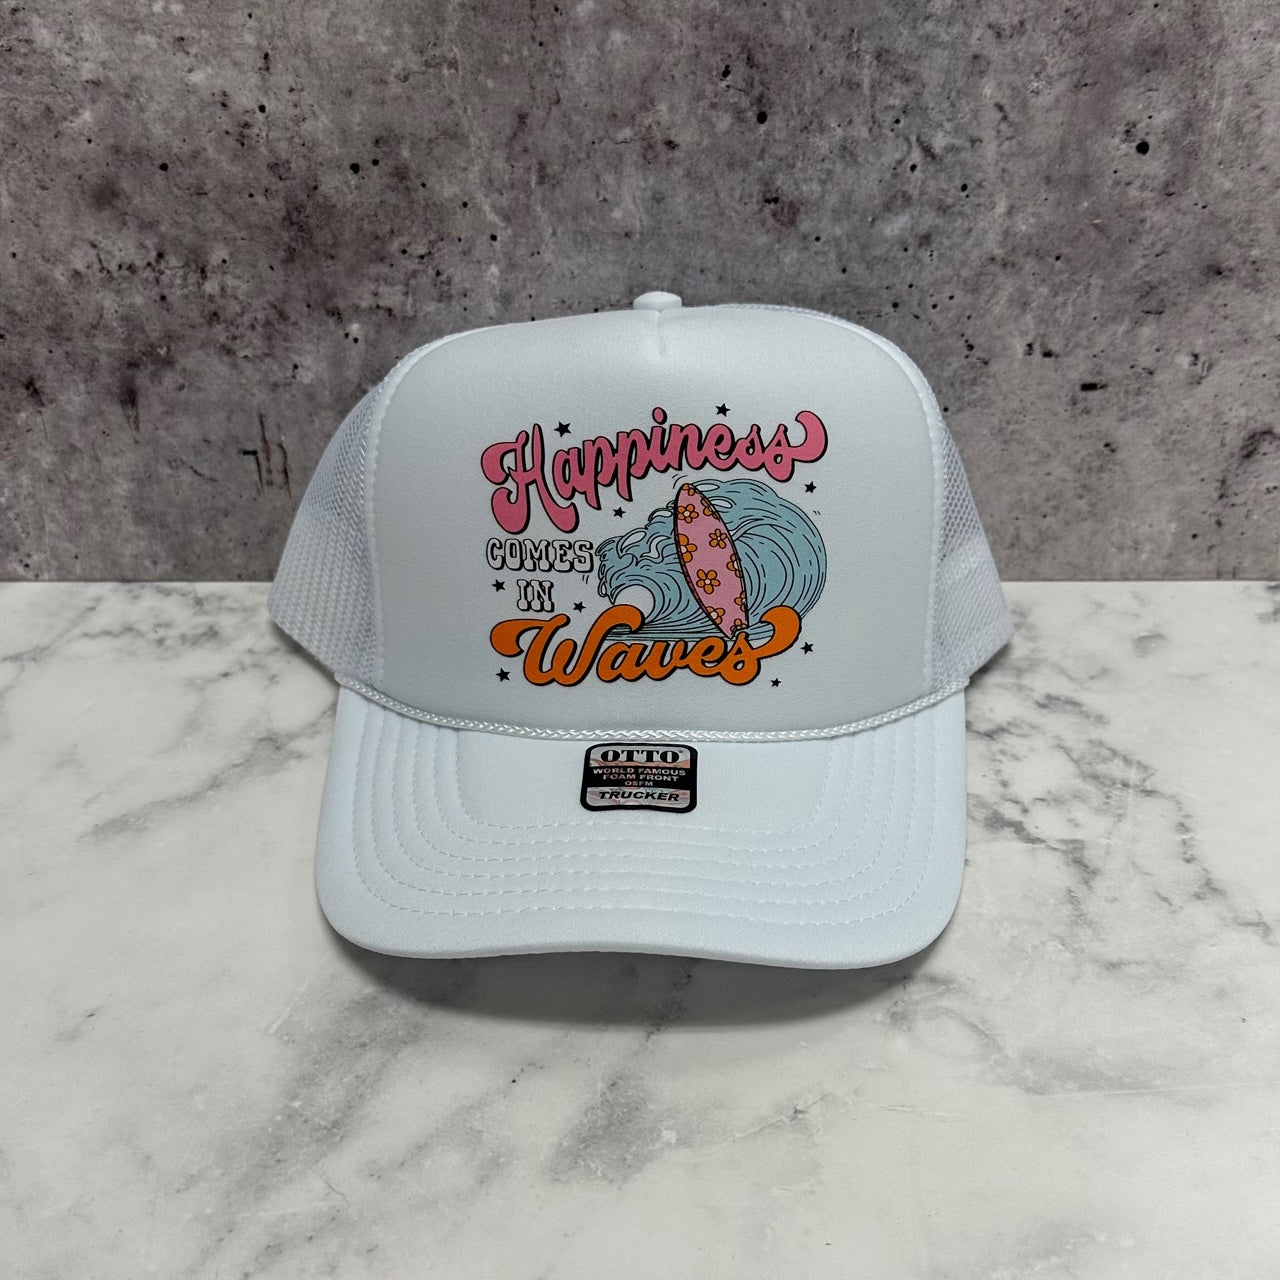 Happiness Comes in Waves Trucker Hat